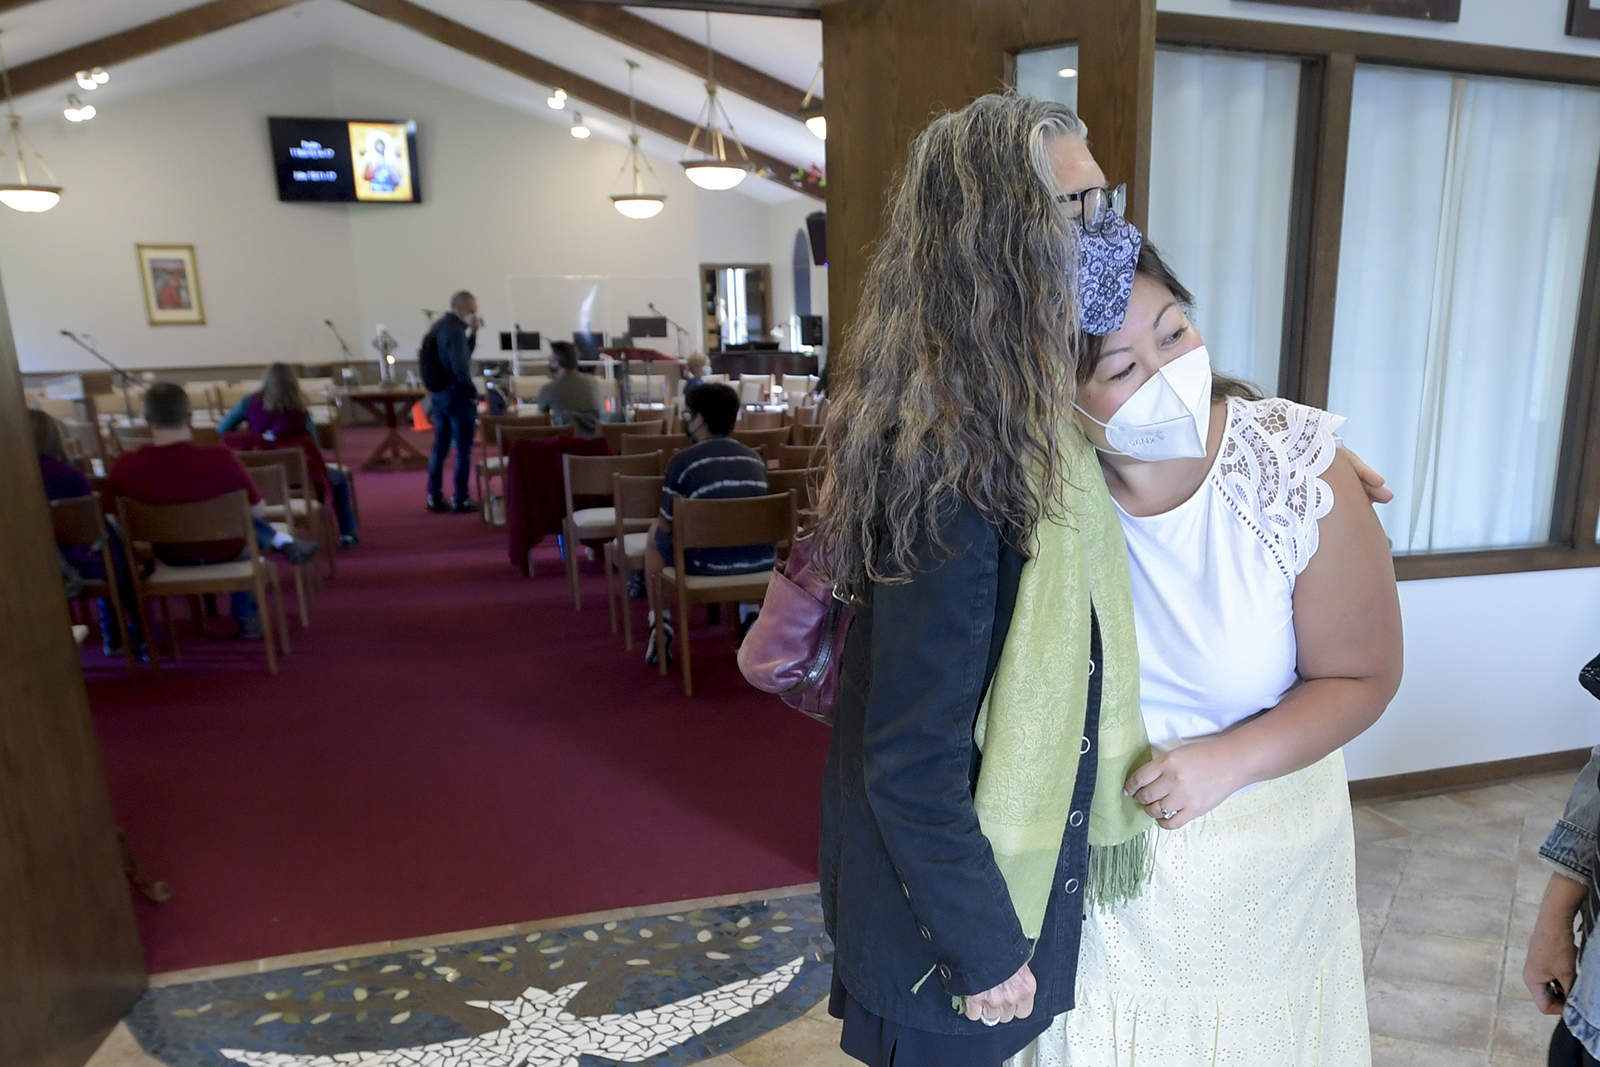 Parishioner Pam Sutherland, left, gives Pastor Juliet Liu a hug prior to services at Life on the Vine church in Long Grove, Ill., on Sunday, May 22, 2022. (AP Photo/Mark Black)